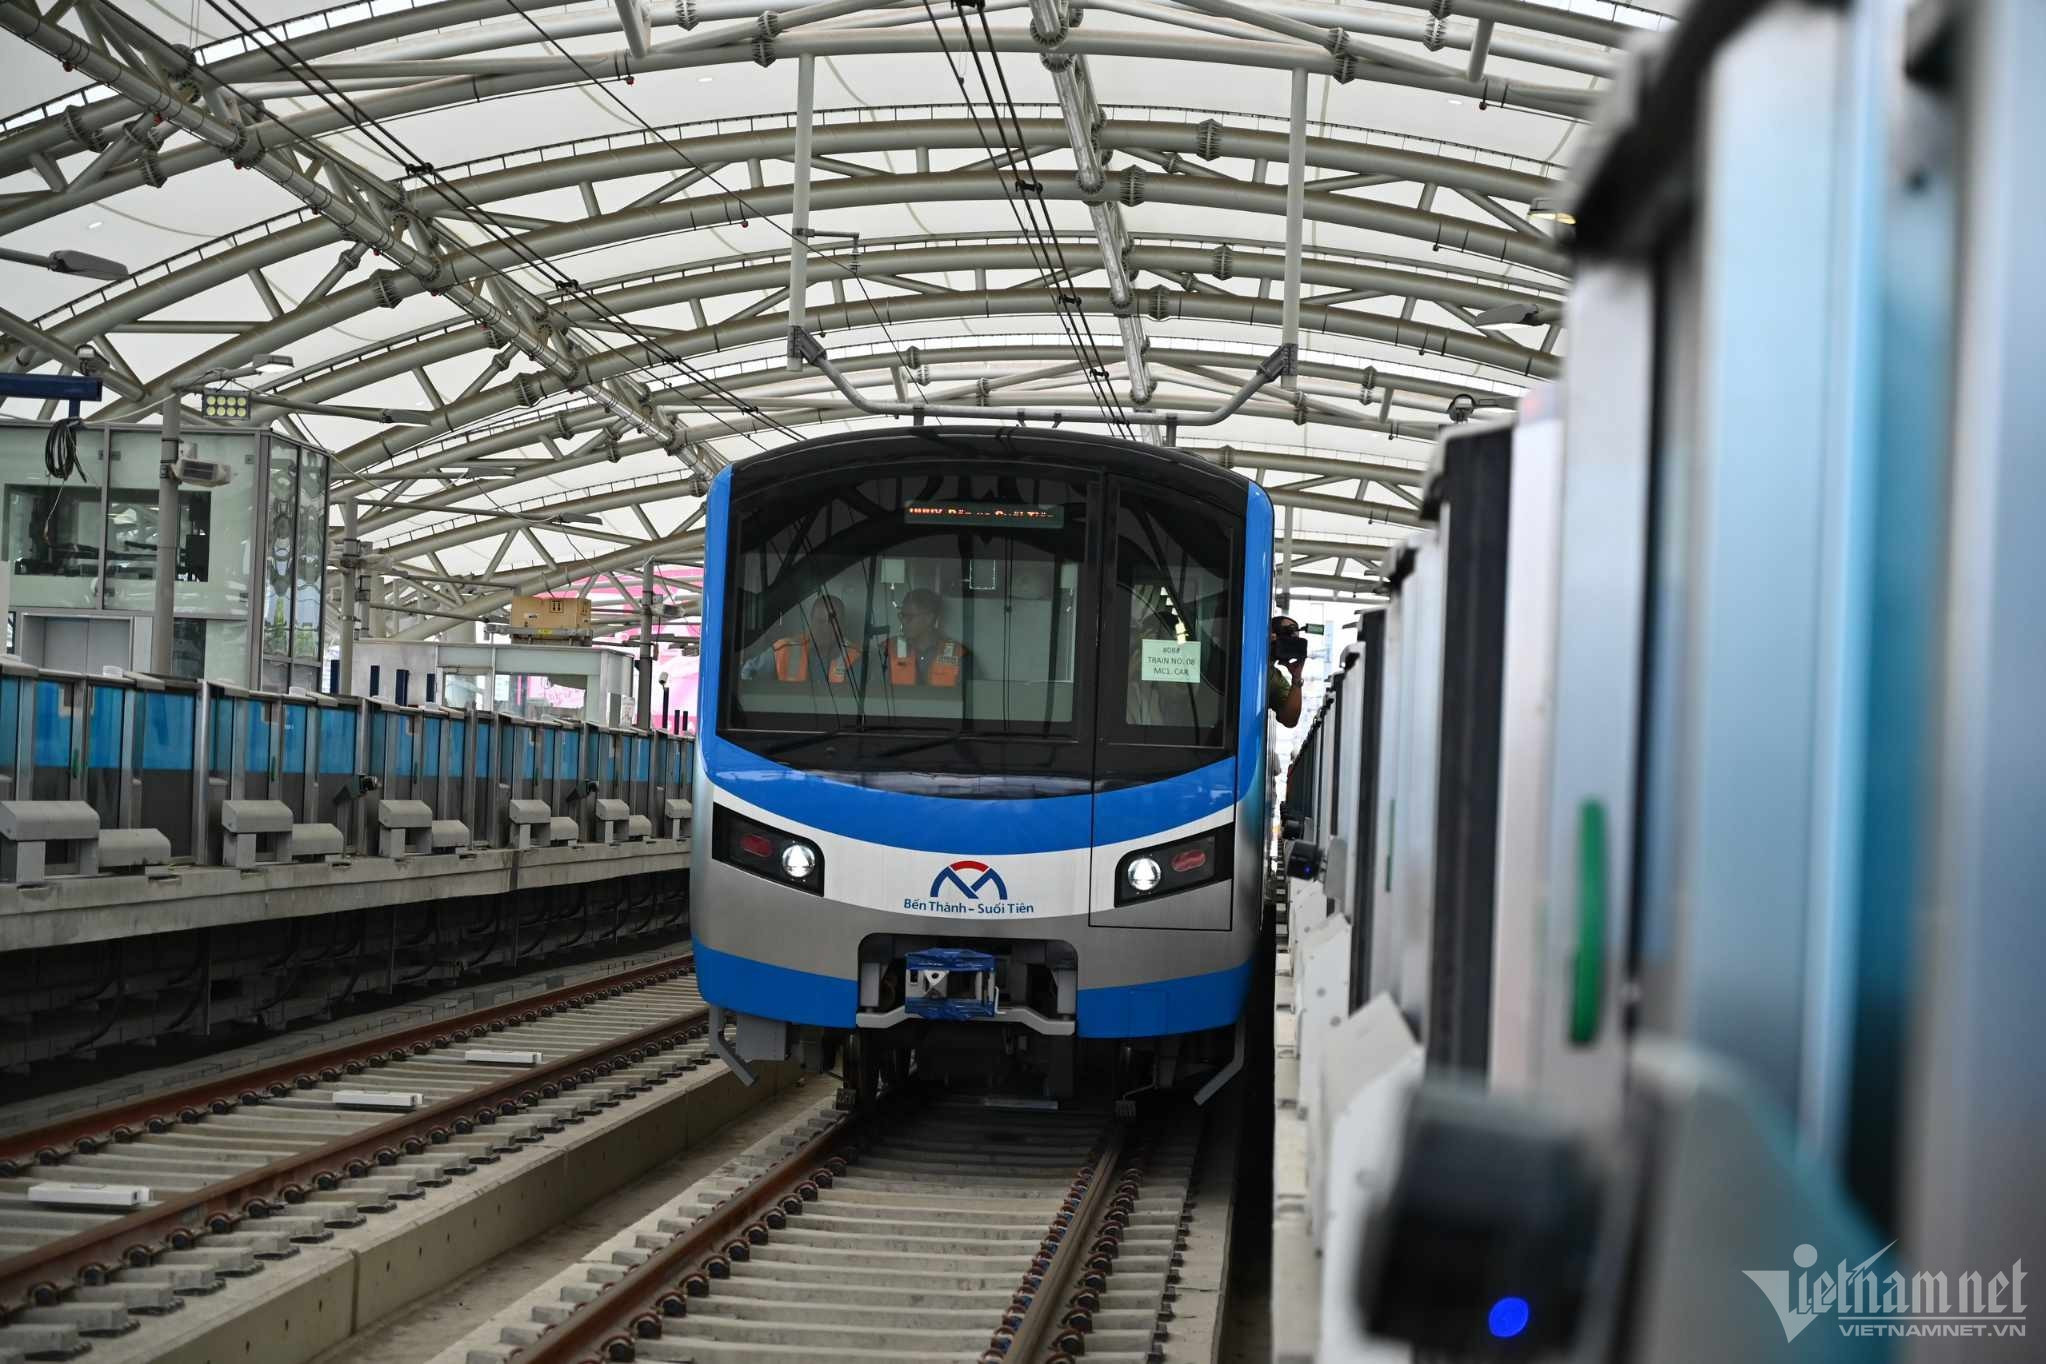 VN advised to build subway system for further growth: lecturer